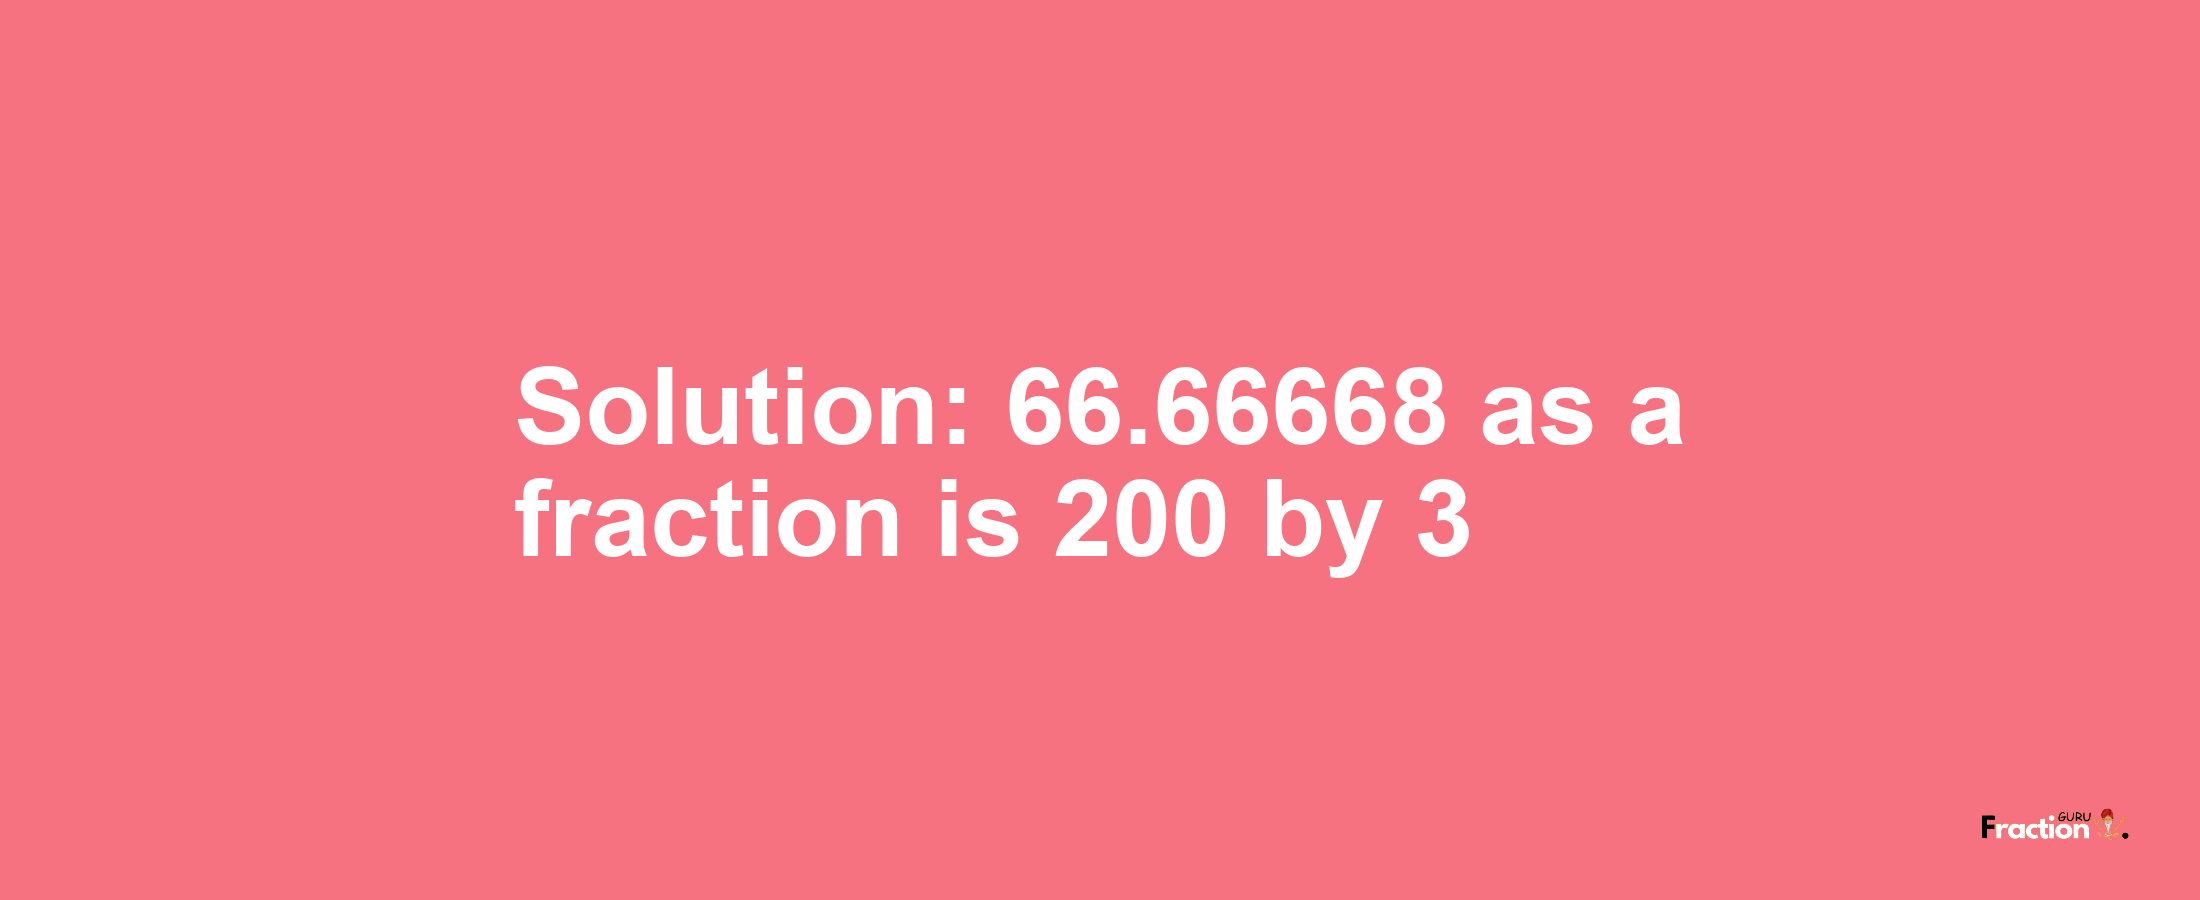 Solution:66.66668 as a fraction is 200/3